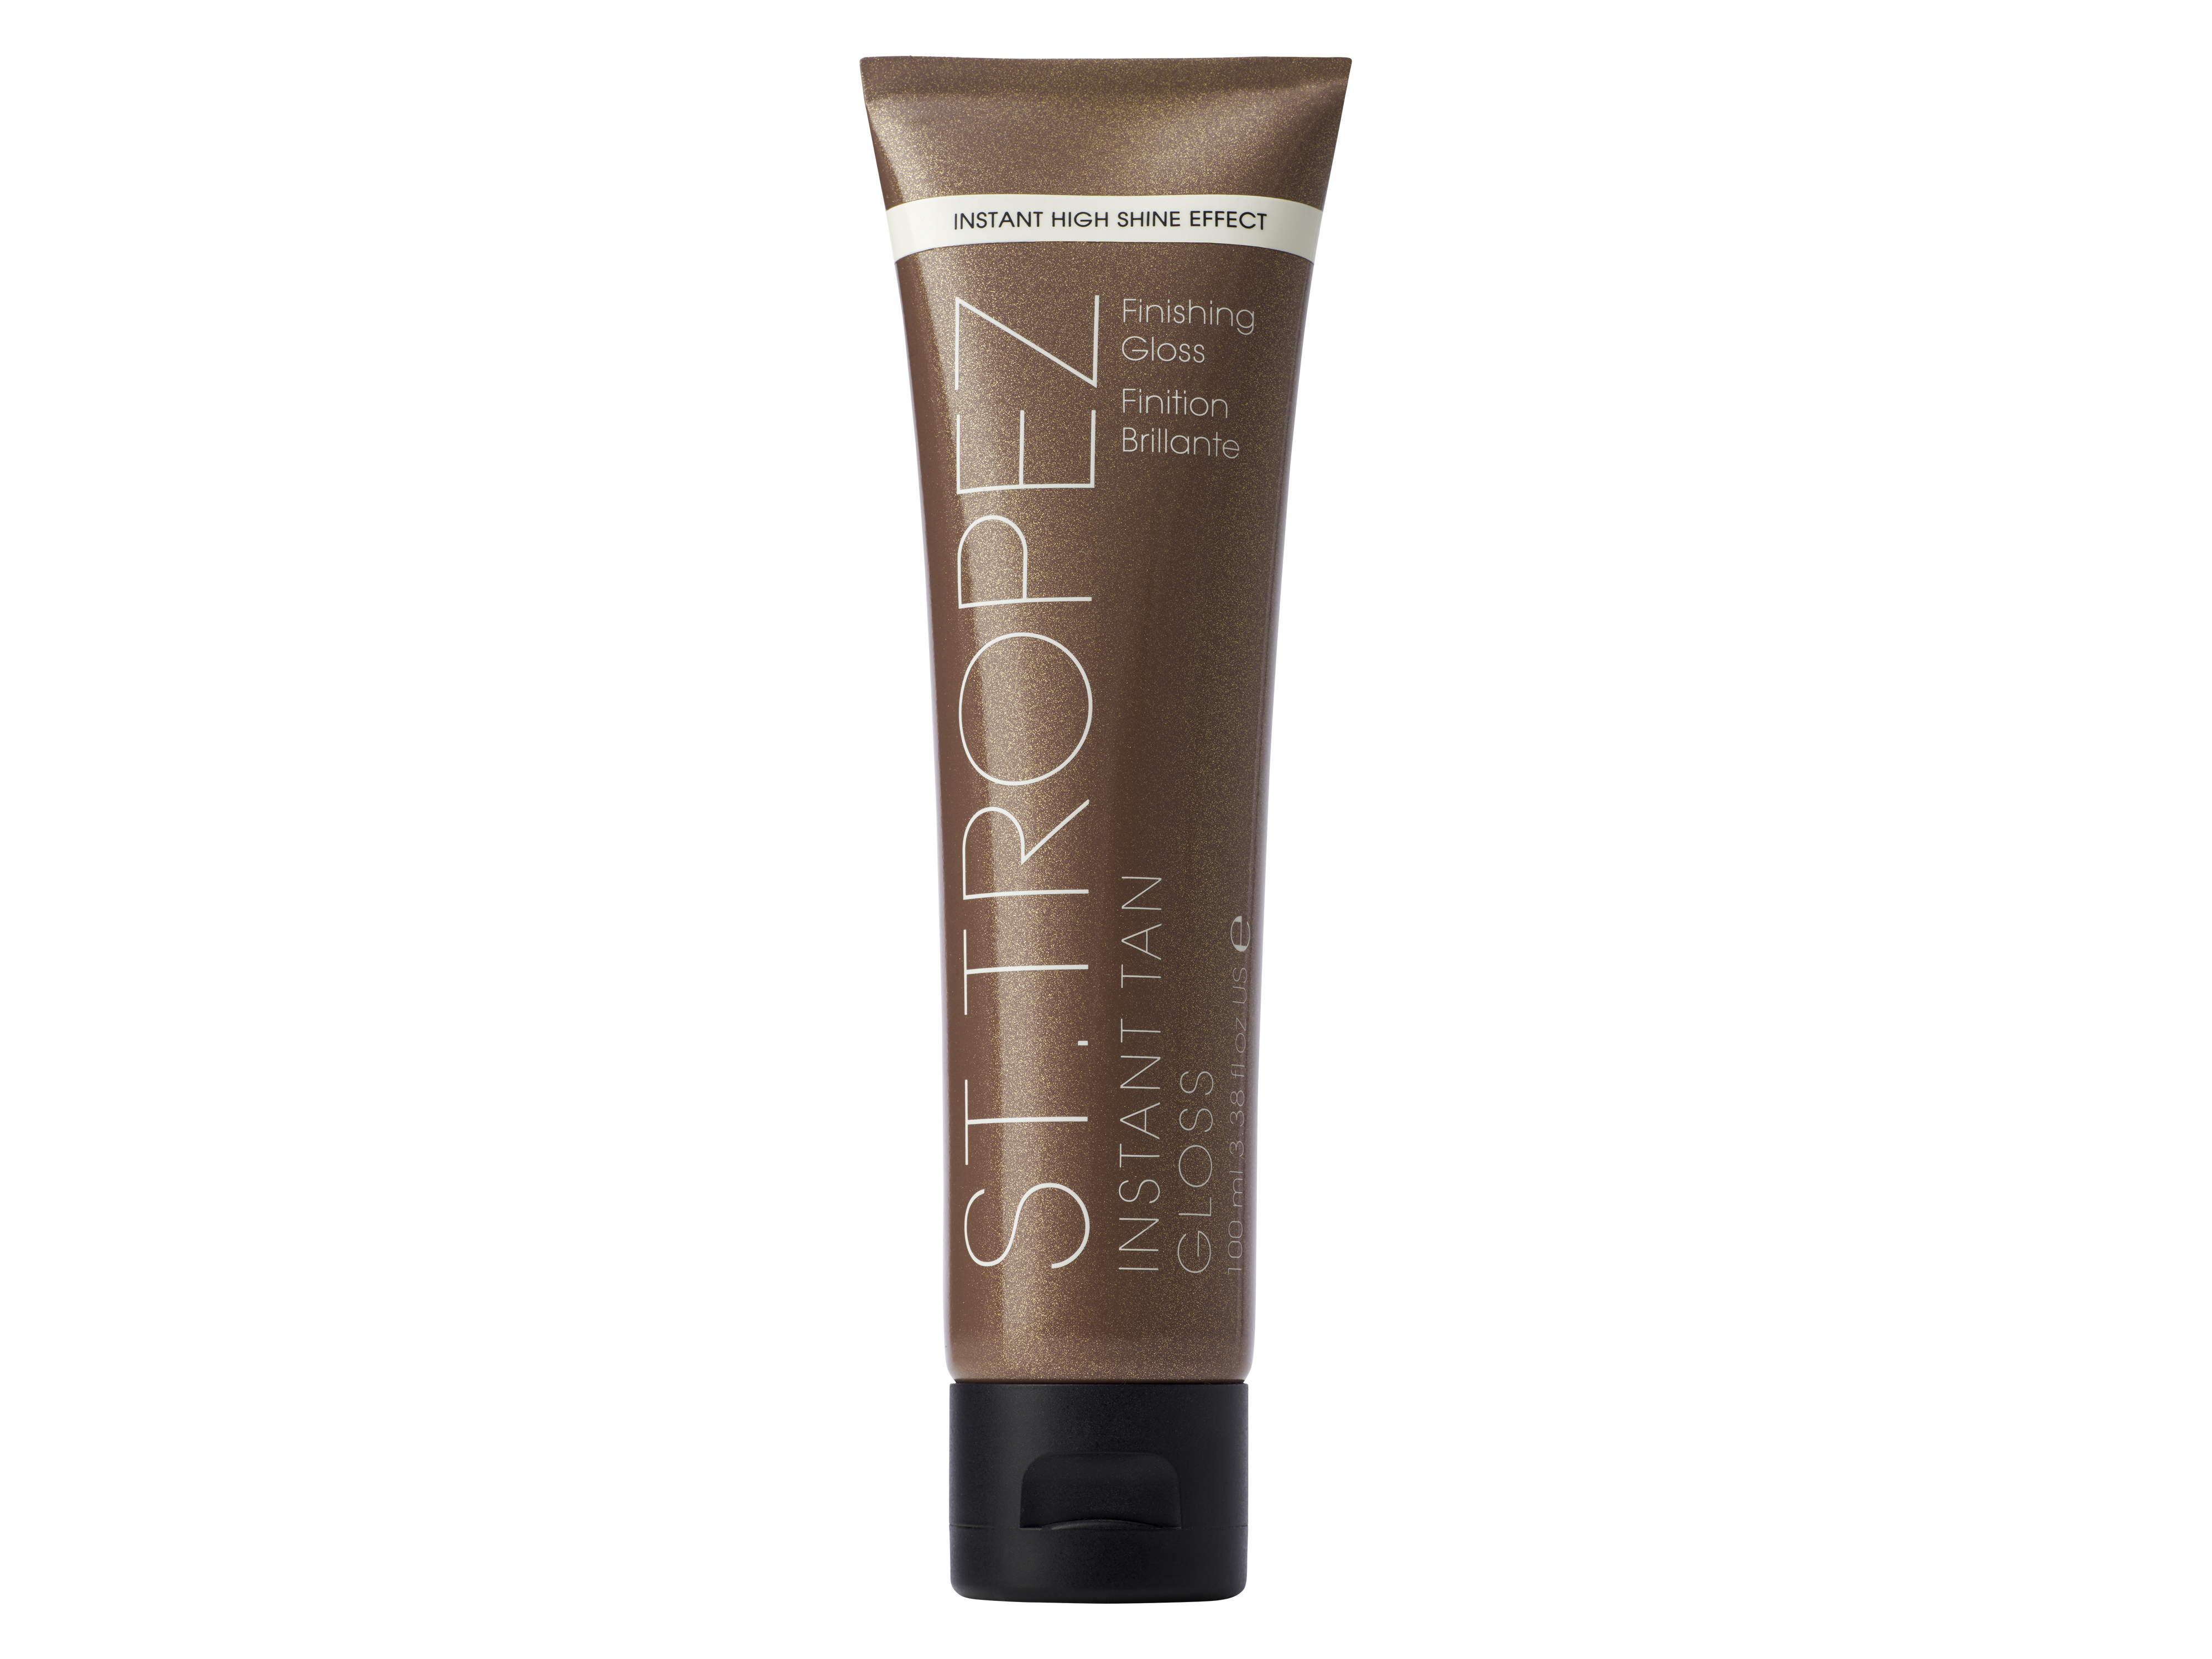 St.Tropez StTropes Instant Tan Finishing Gloss, 100